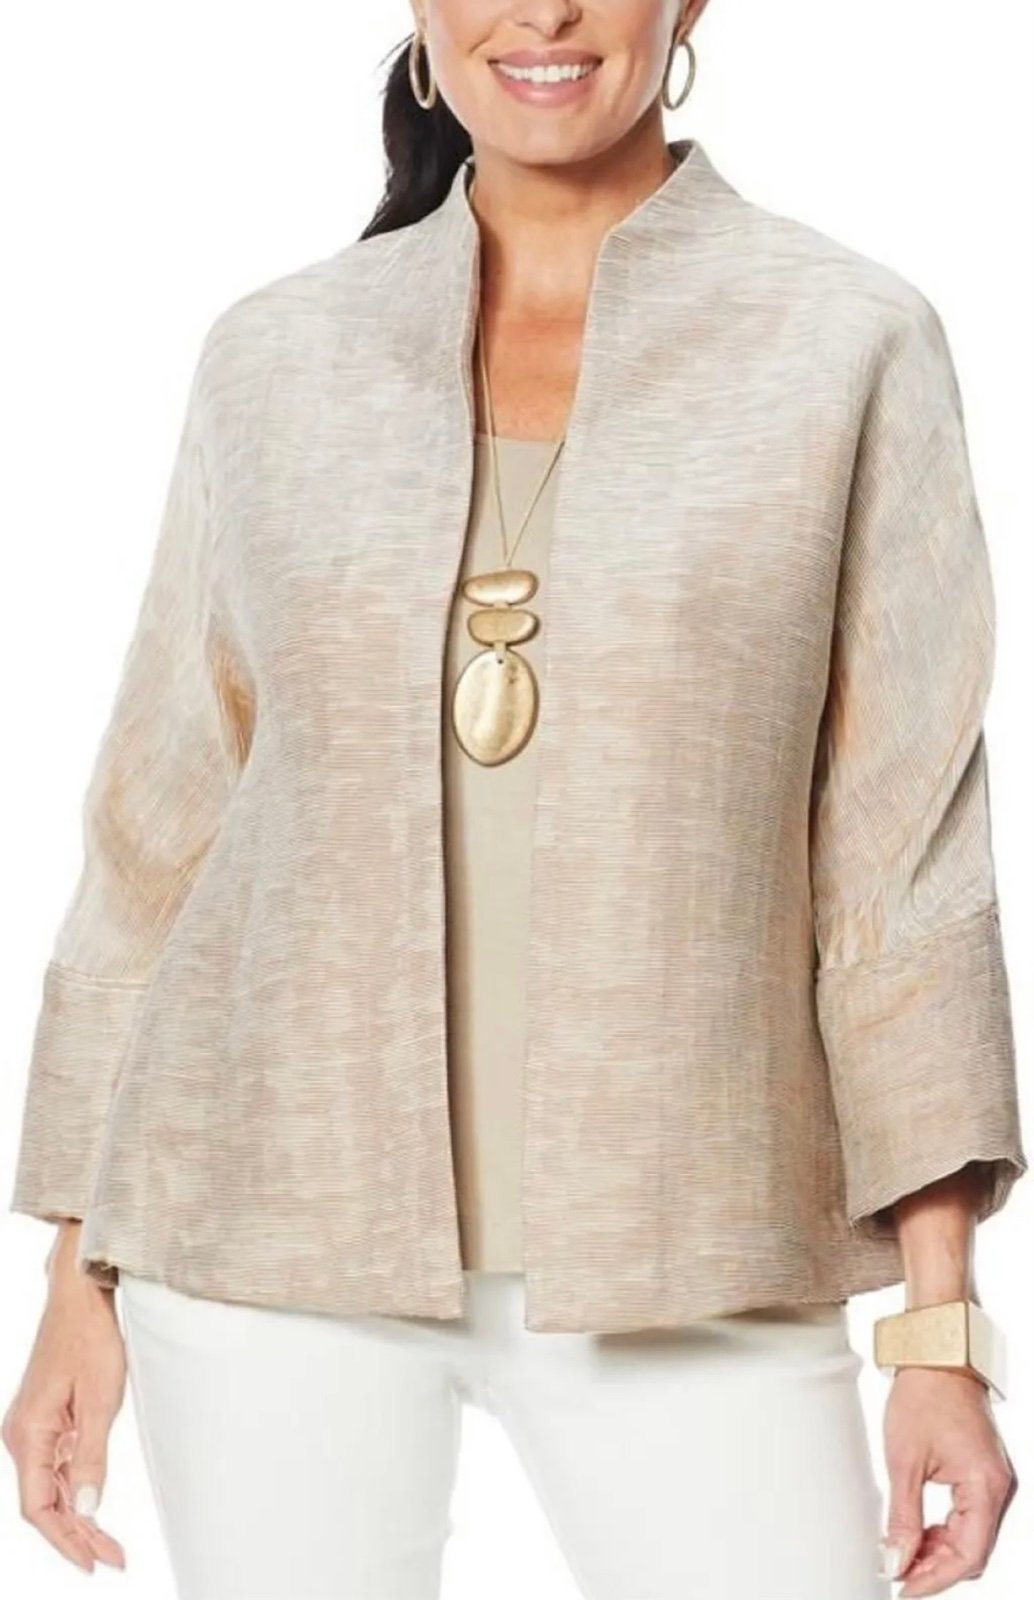 Great MarlaWynne Jacquard Textured top jacket sz M GDAol8Ctf all for you